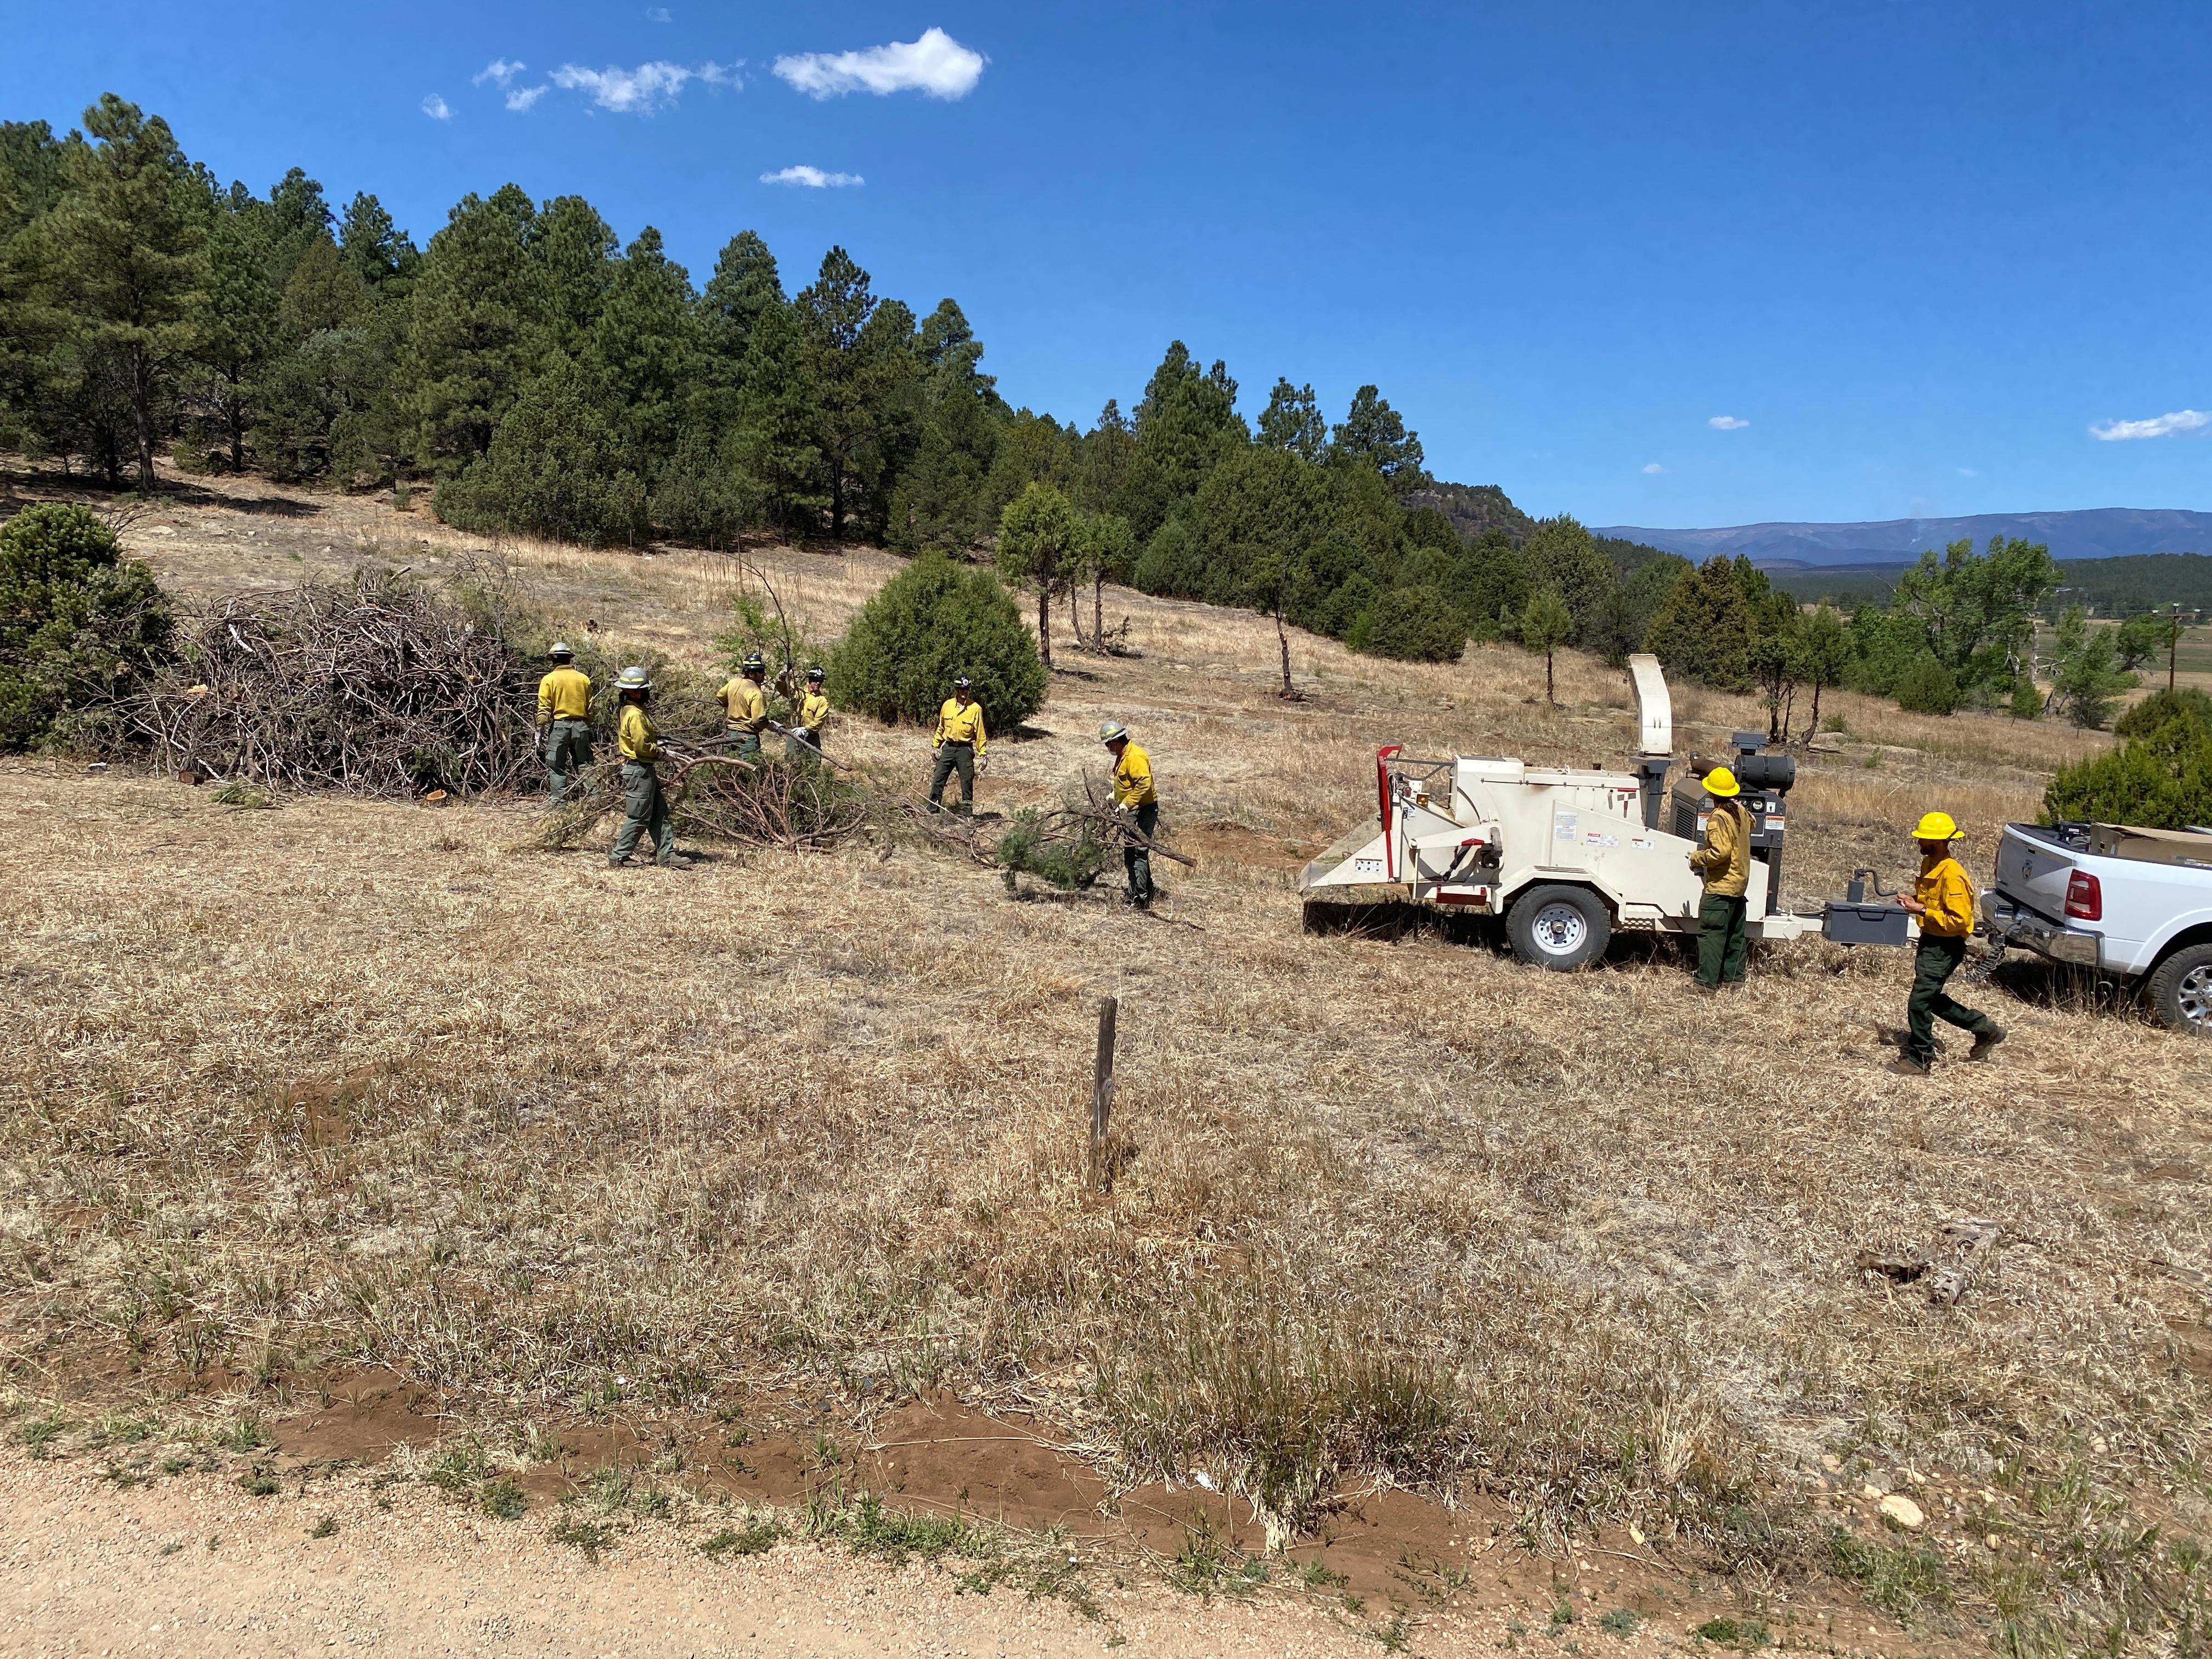 Open meadow with trees in the distance.  Multiple firefighers with green pants, yellow shirts and hardhats placing tree branches into chipper pulled behind a vehicle.